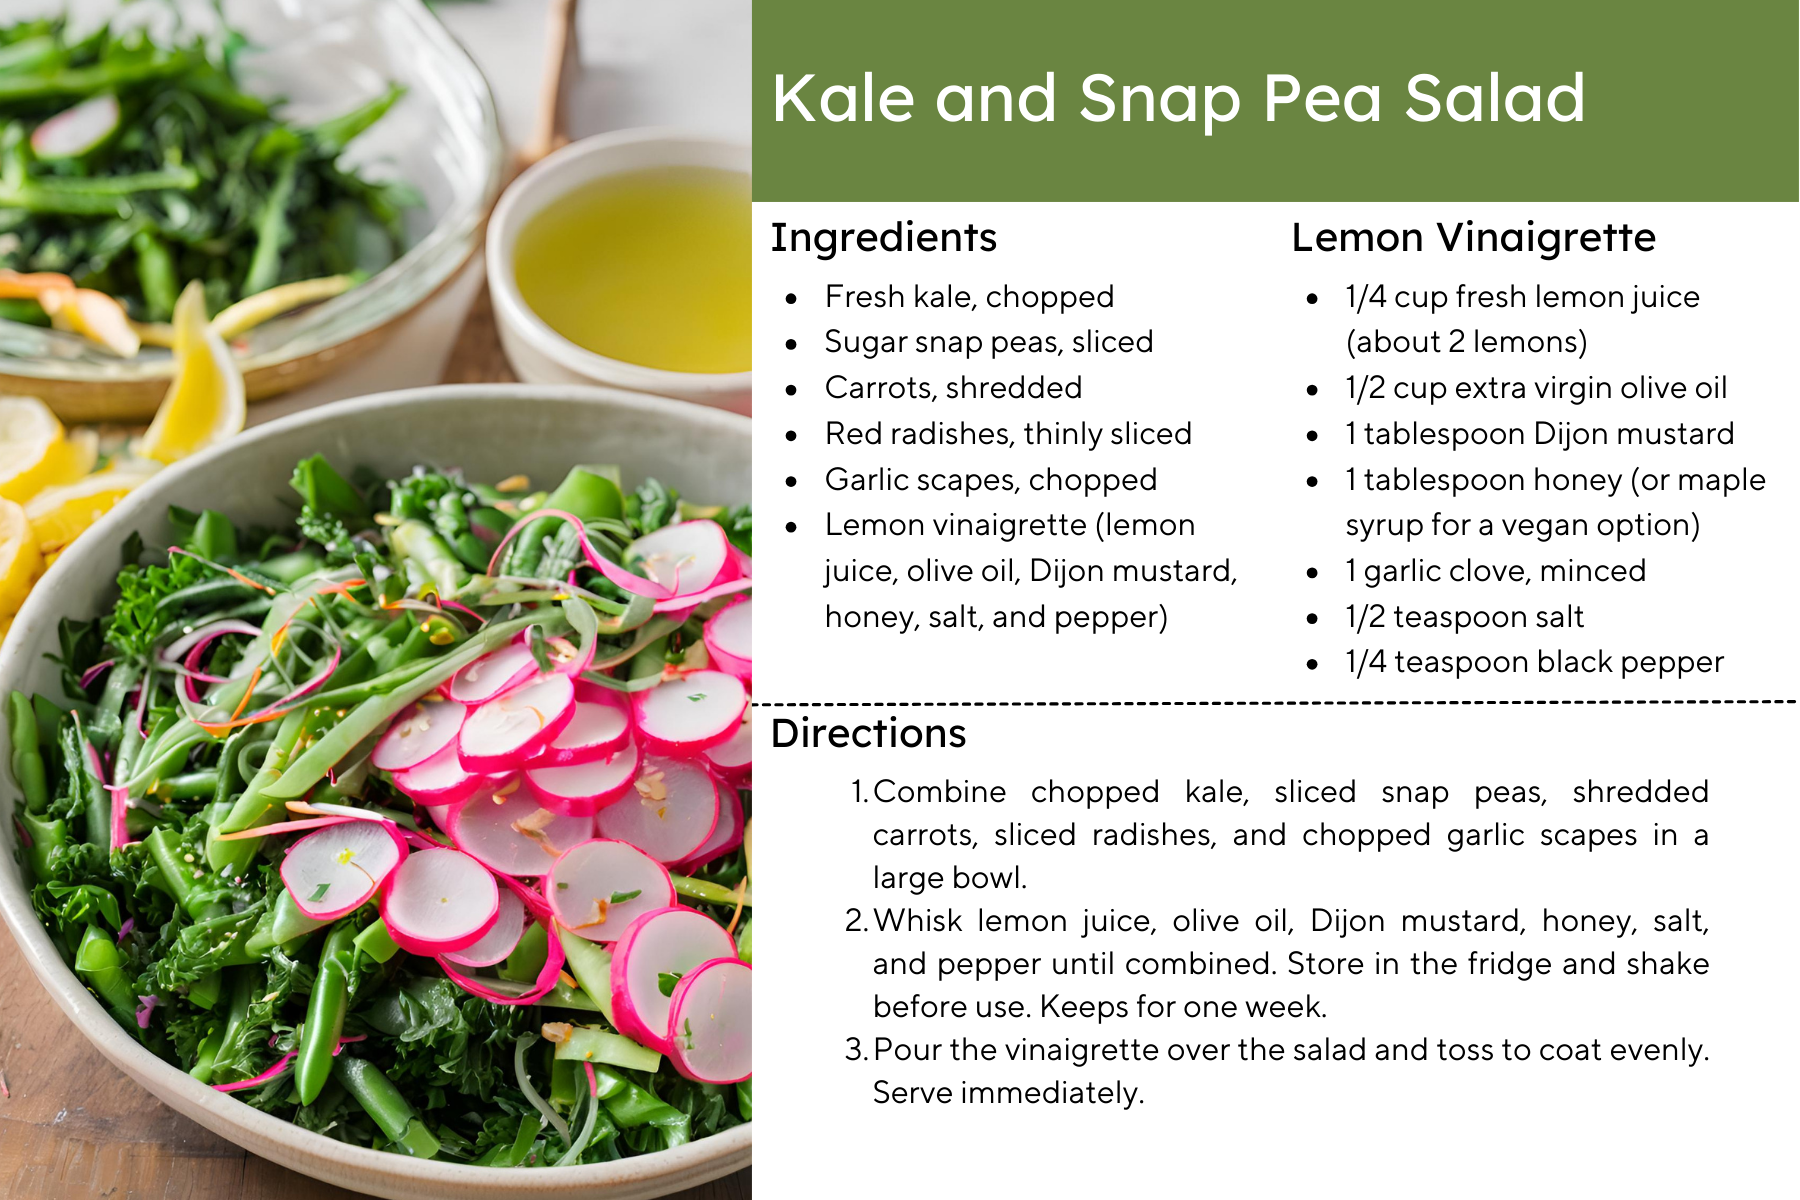 Recipe Card for Kale and Snap Pea Salad